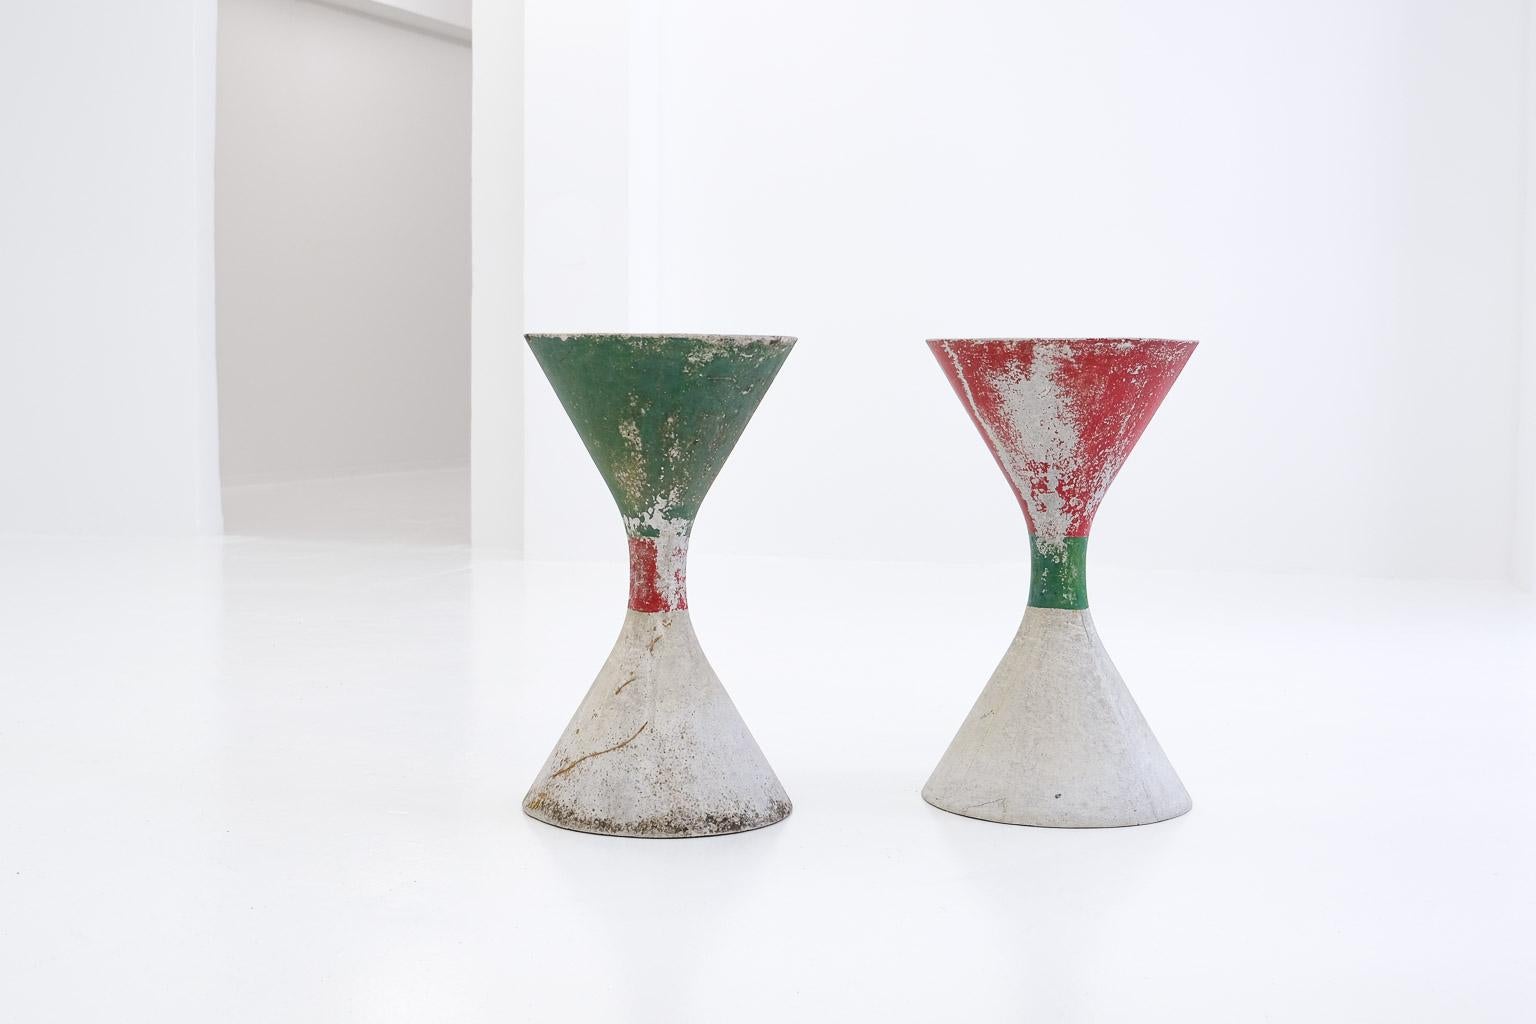 A pair of fibre concrete diabolo planters found in Provence. We honestly have no idea who painted them so perfectly, but we think it’s quite beautiful.